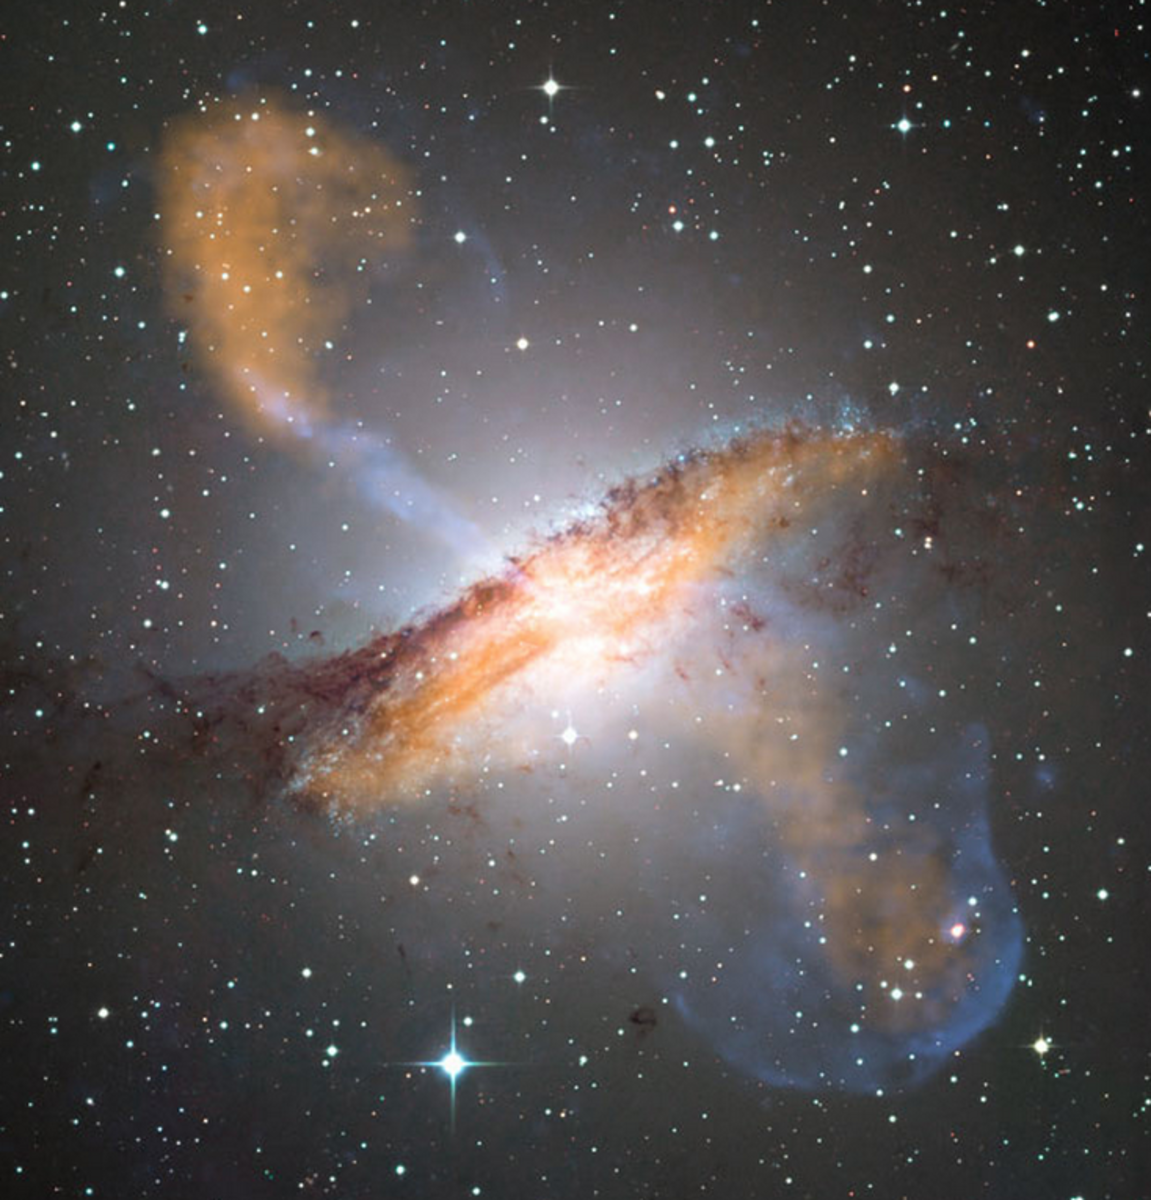 X ray wavelengths (blue) and microwaves (red) superimposed on a visible-light image of Galaxy NGC 5128 reveal the ghostly jets of a giant black hole the mass of 55 million suns.